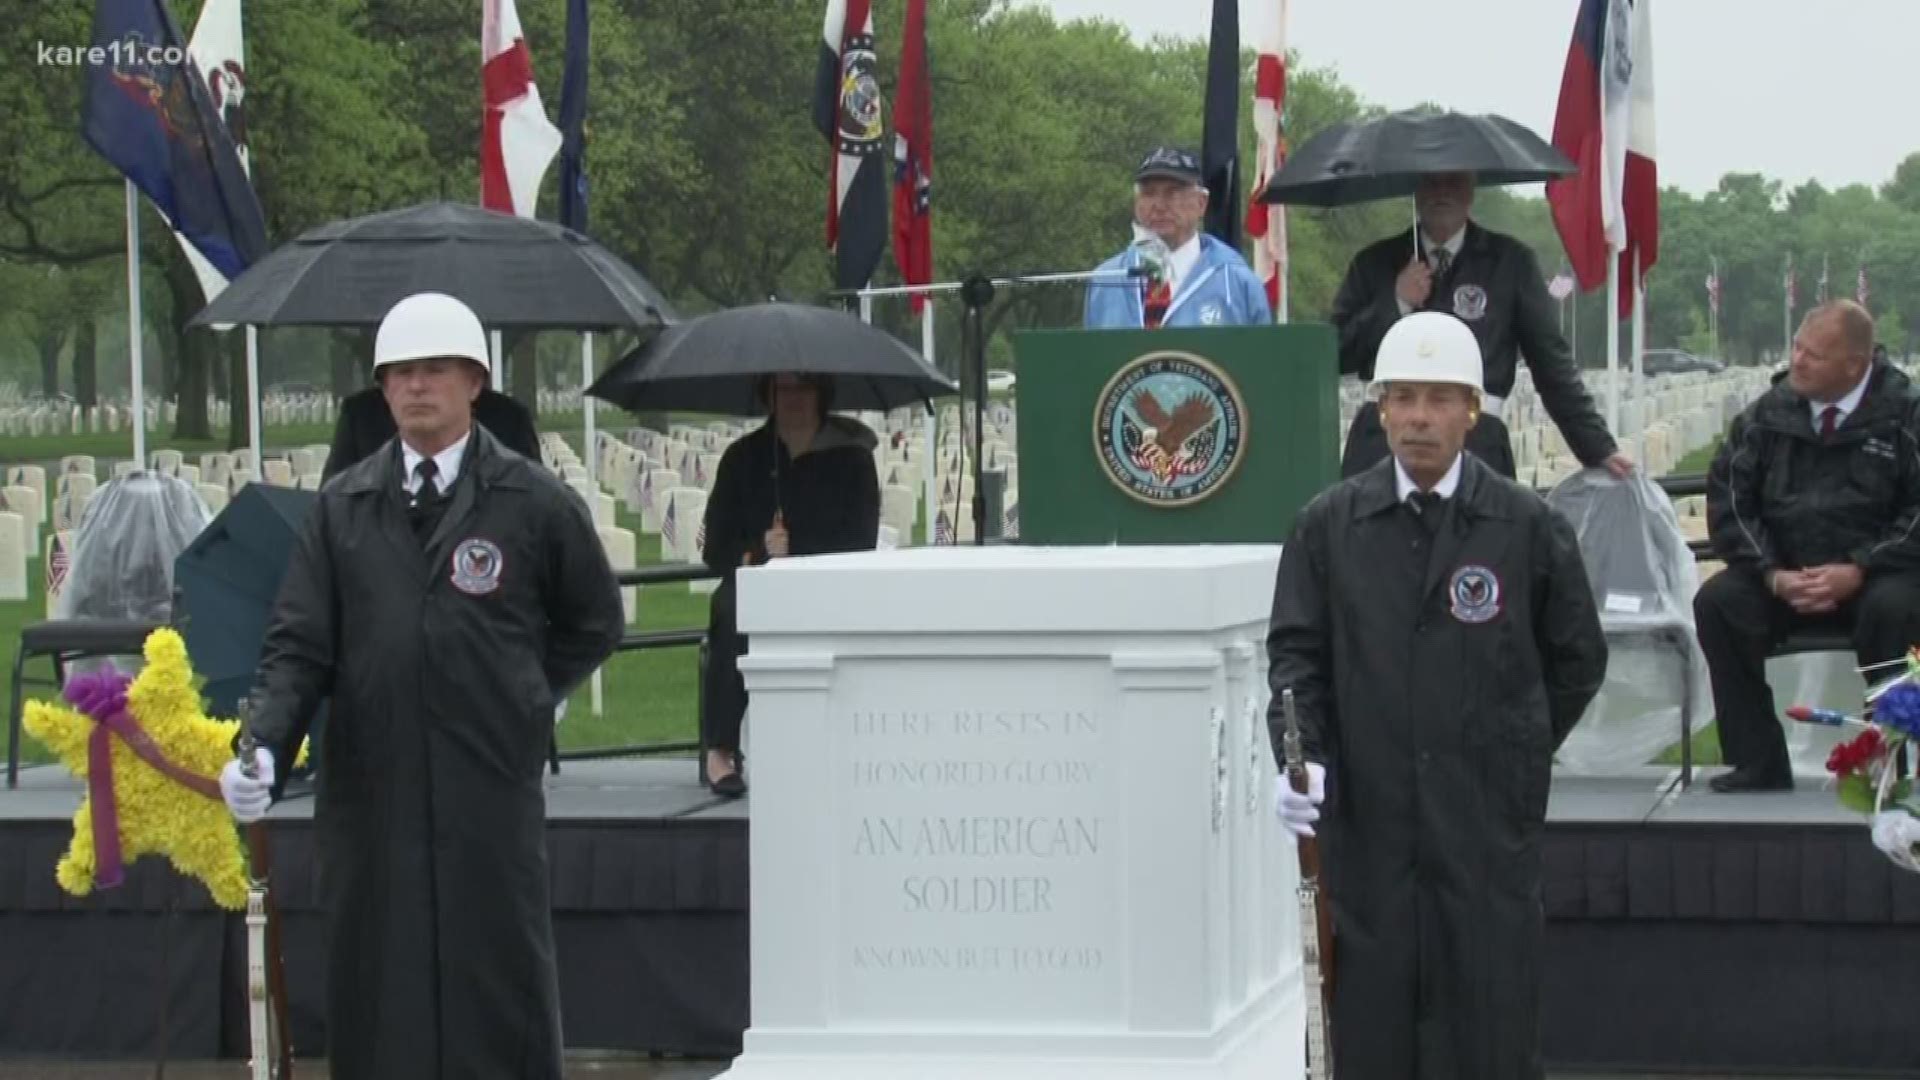 The rain never stopped falling, but that didn't keep people from honoring the sacrifice of fallen heroes on Memorial Day at Fort Snelling National Cemetery.